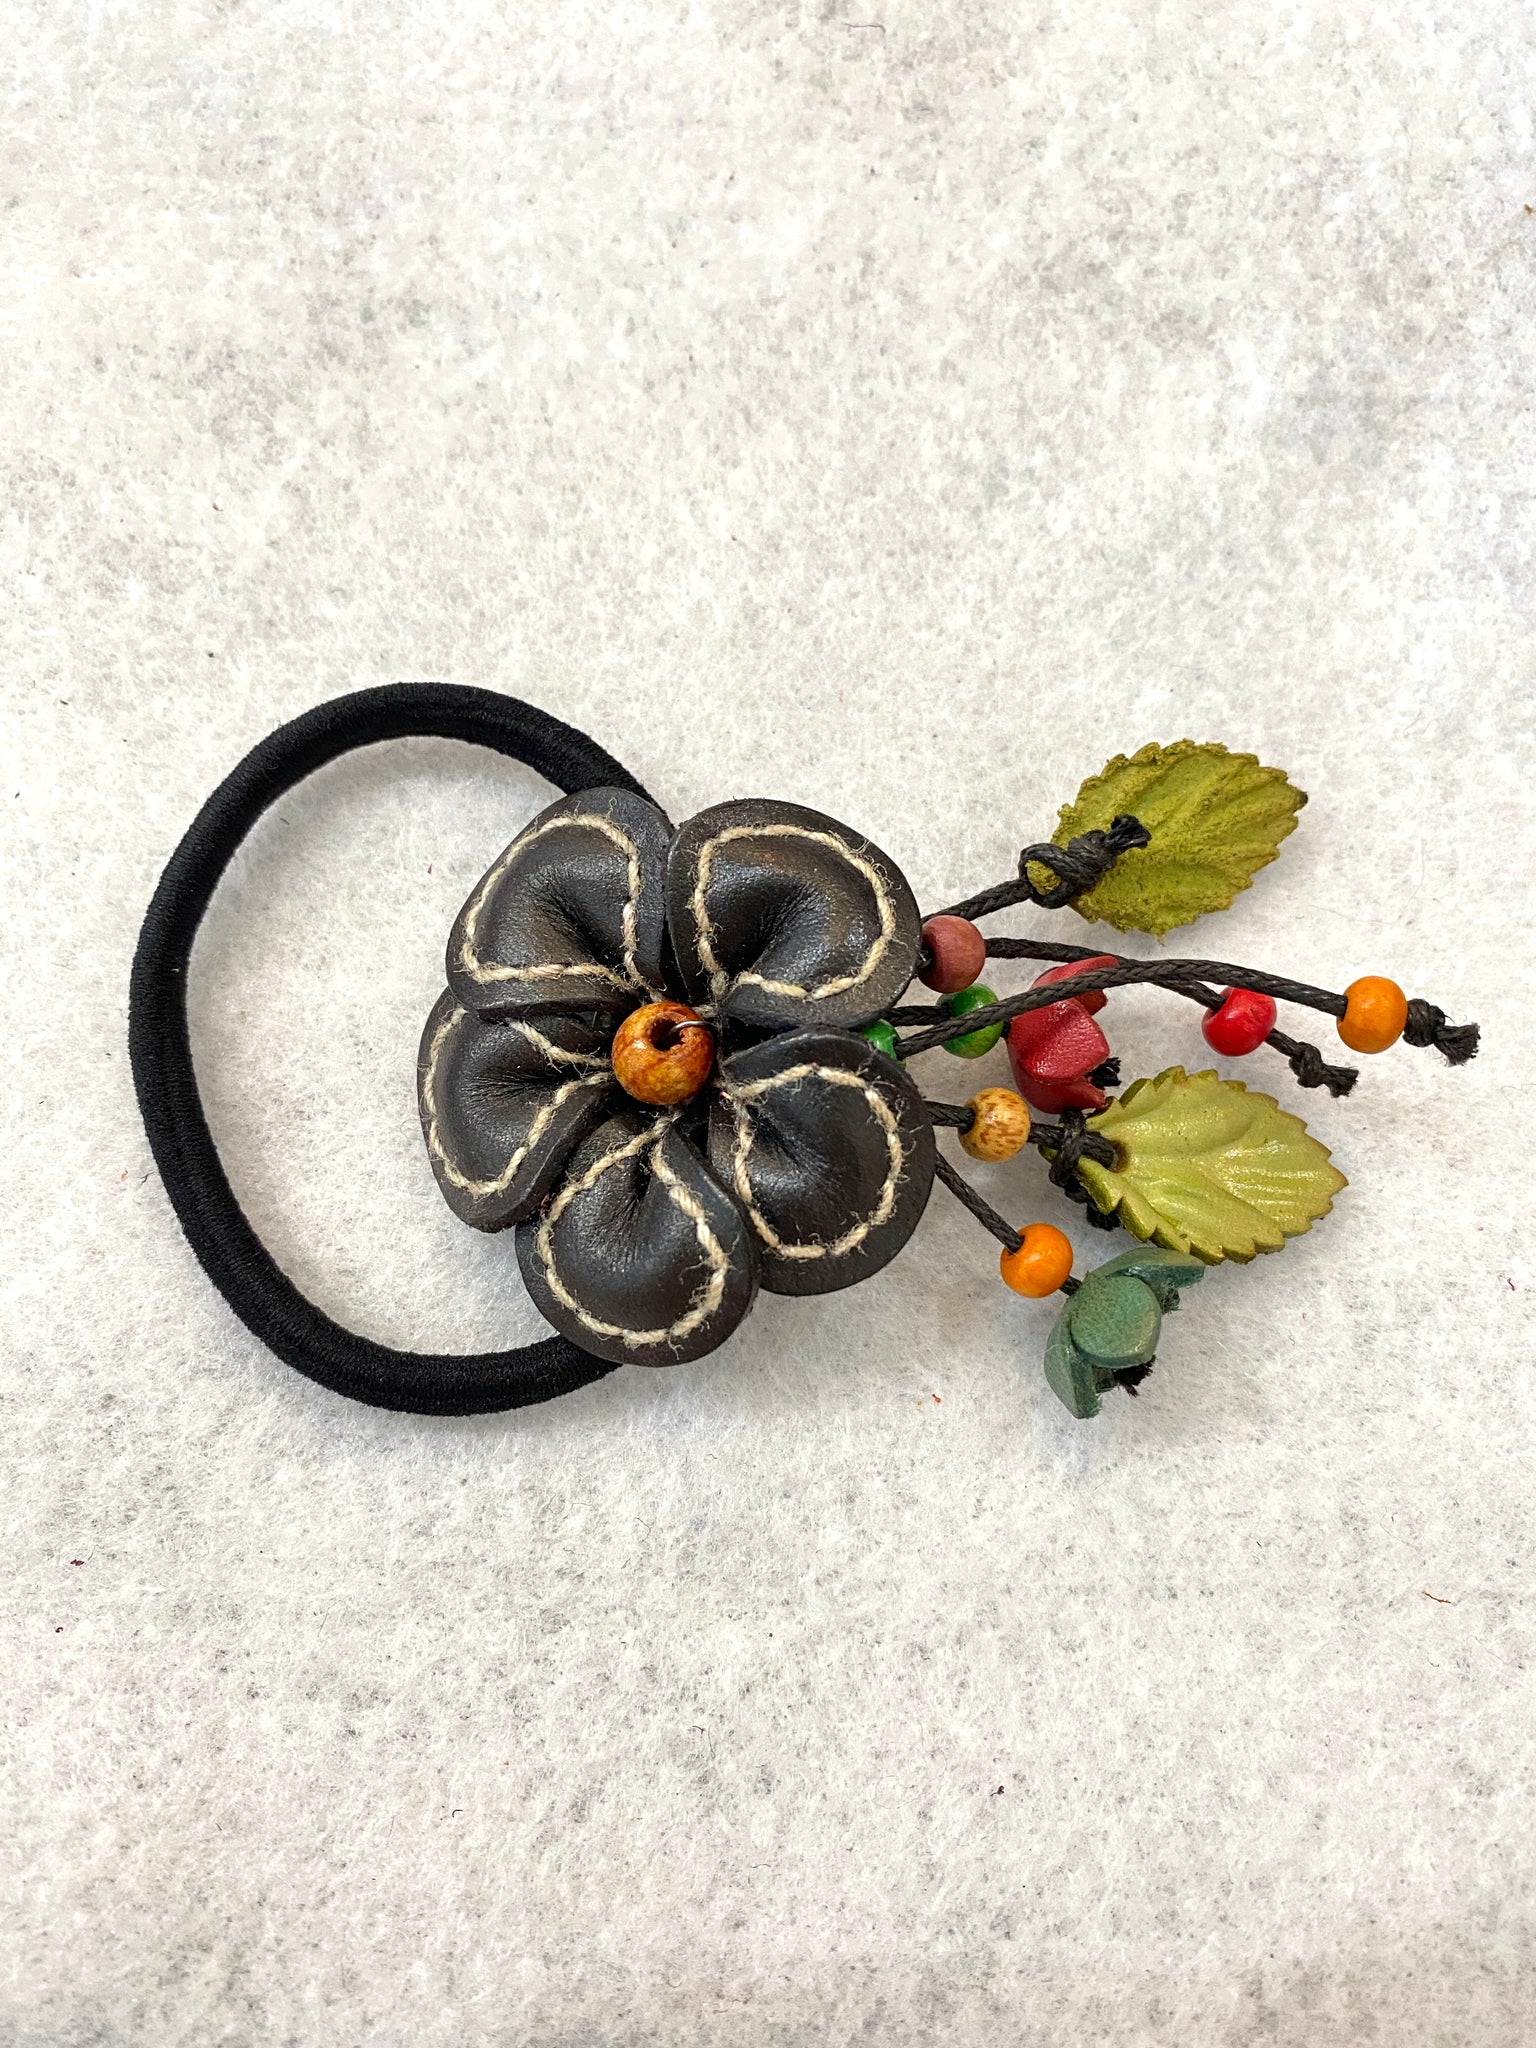 Flower Genuine Leather Scrunchies / Hair Ties with Dangling Flower Buds and Leaves